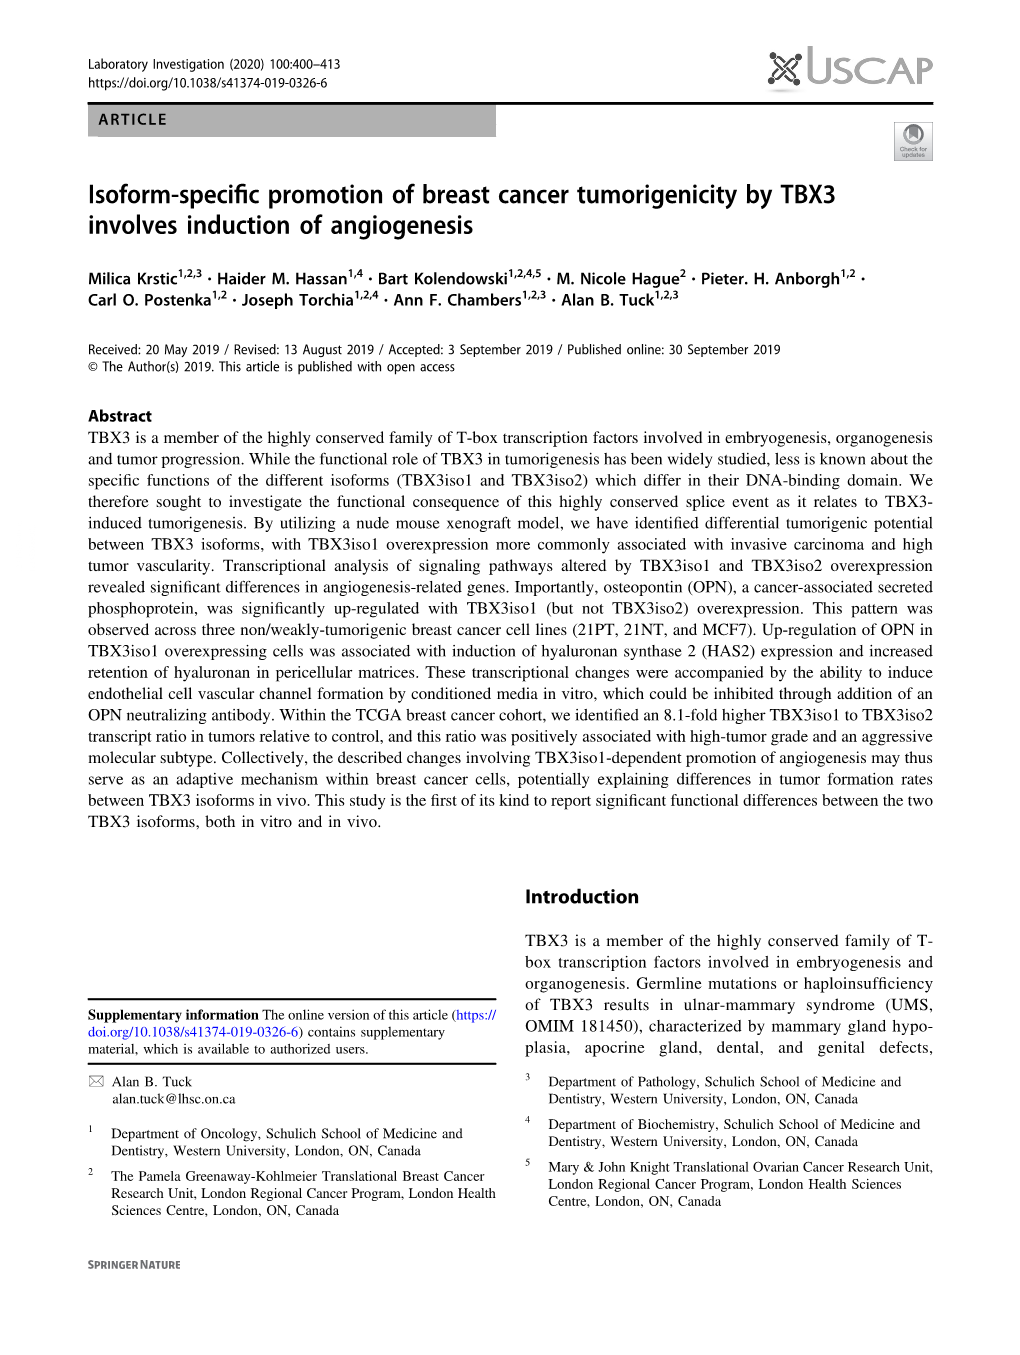 Isoform-Specific Promotion of Breast Cancer Tumorigenicity by TBX3